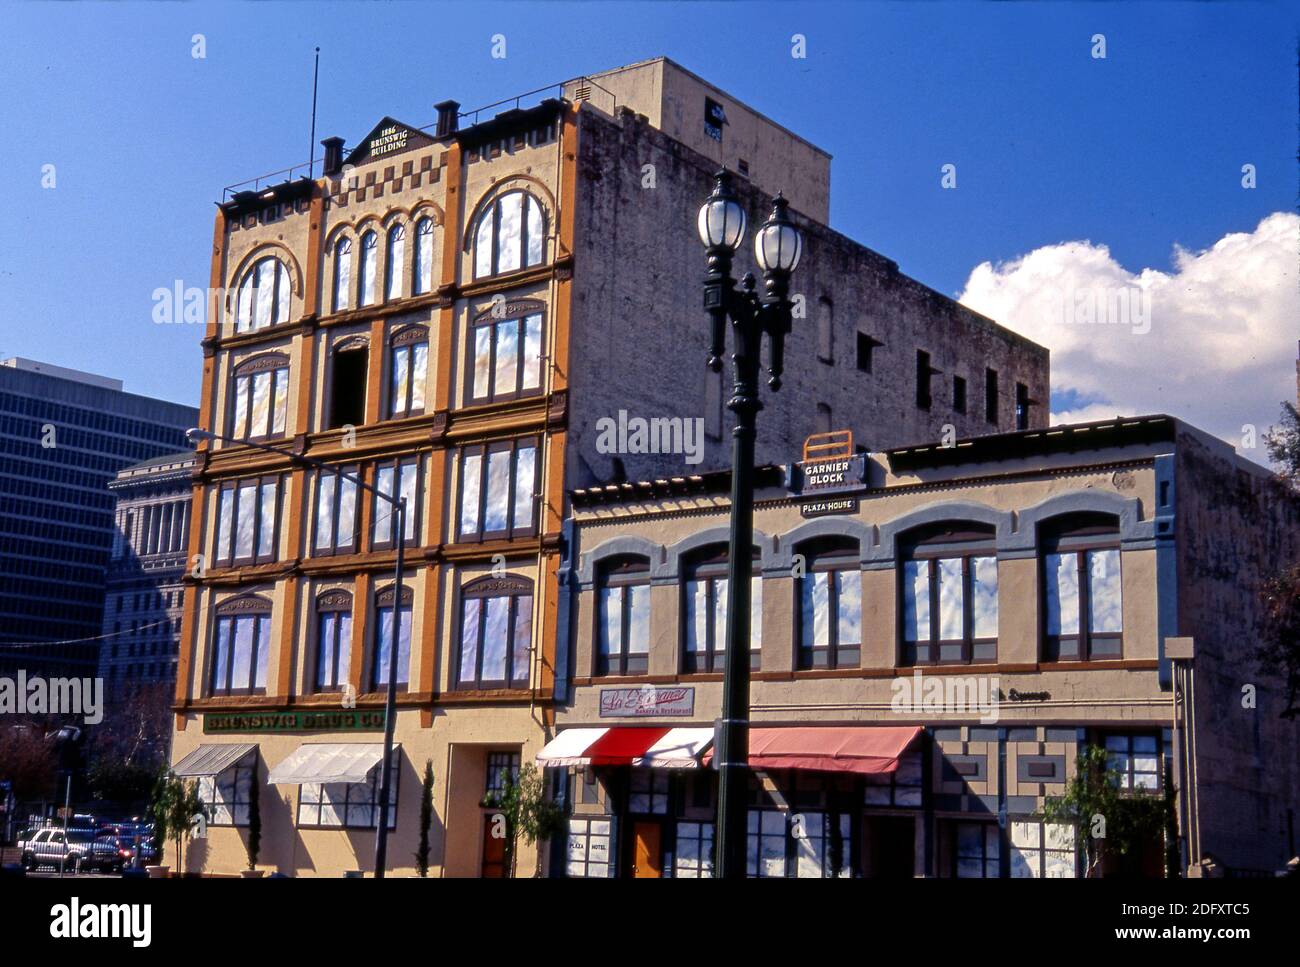 The Brunswig Building from 1886, historic architecture in downtown Los Angeles, CA Stock Photo